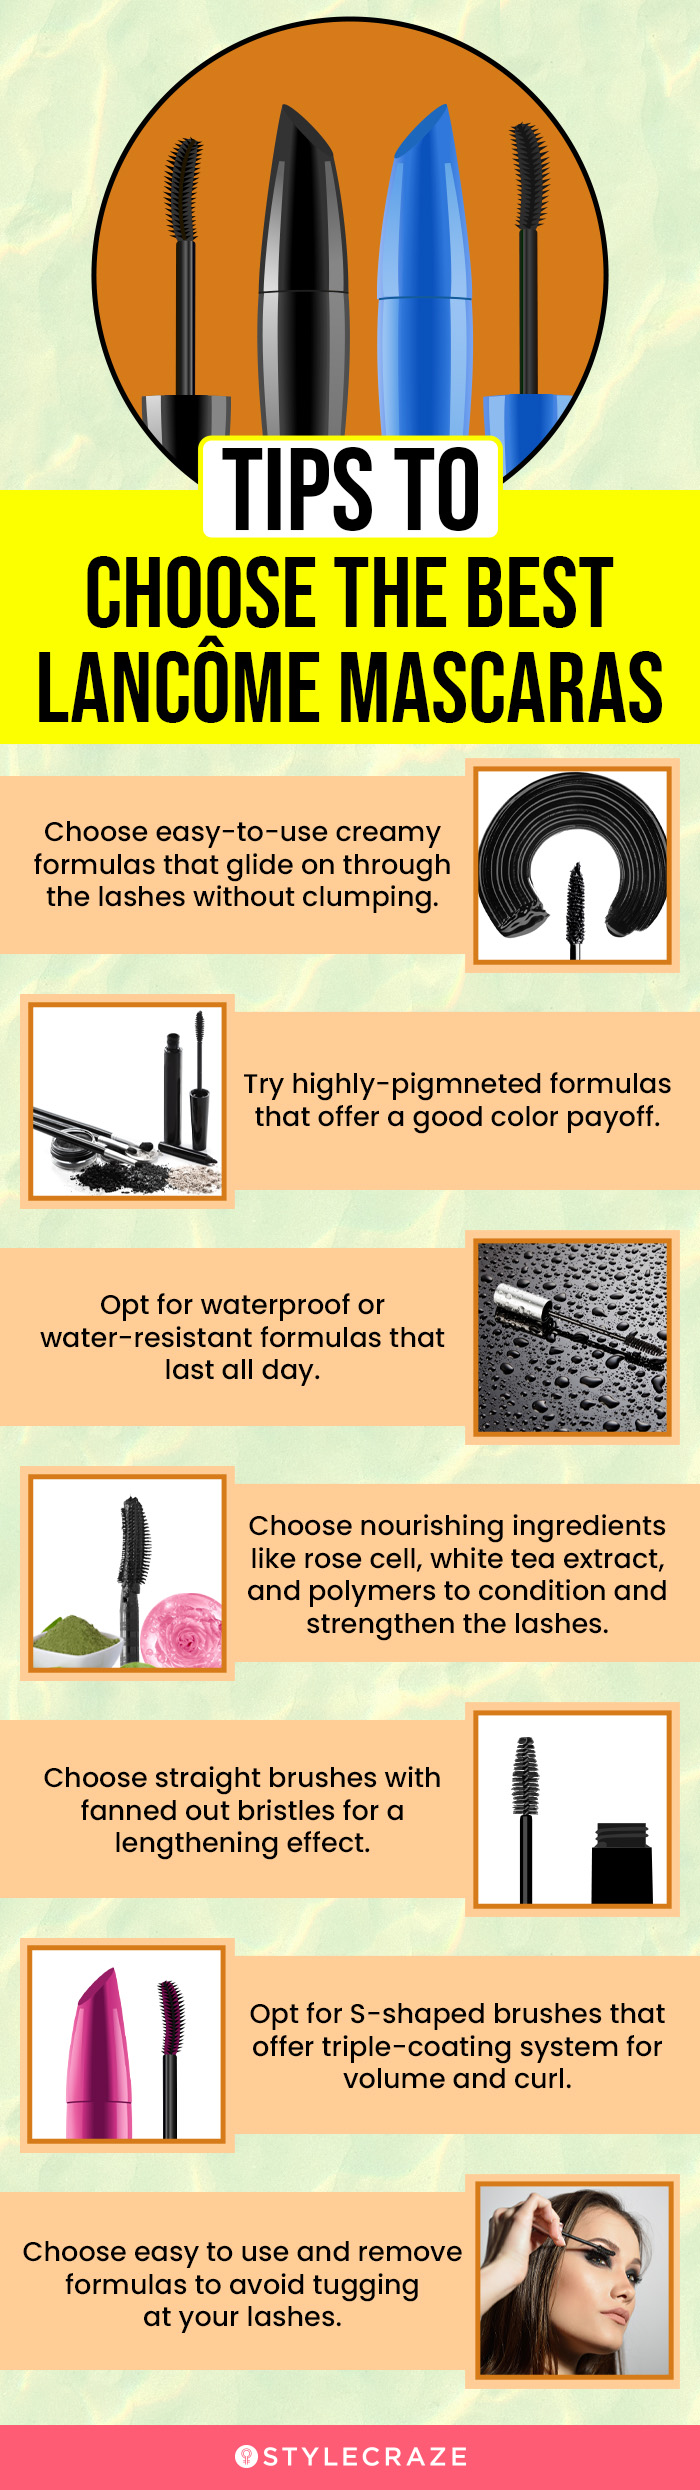 Tips To Choose The Best Lancôme Mascaras (infographic)